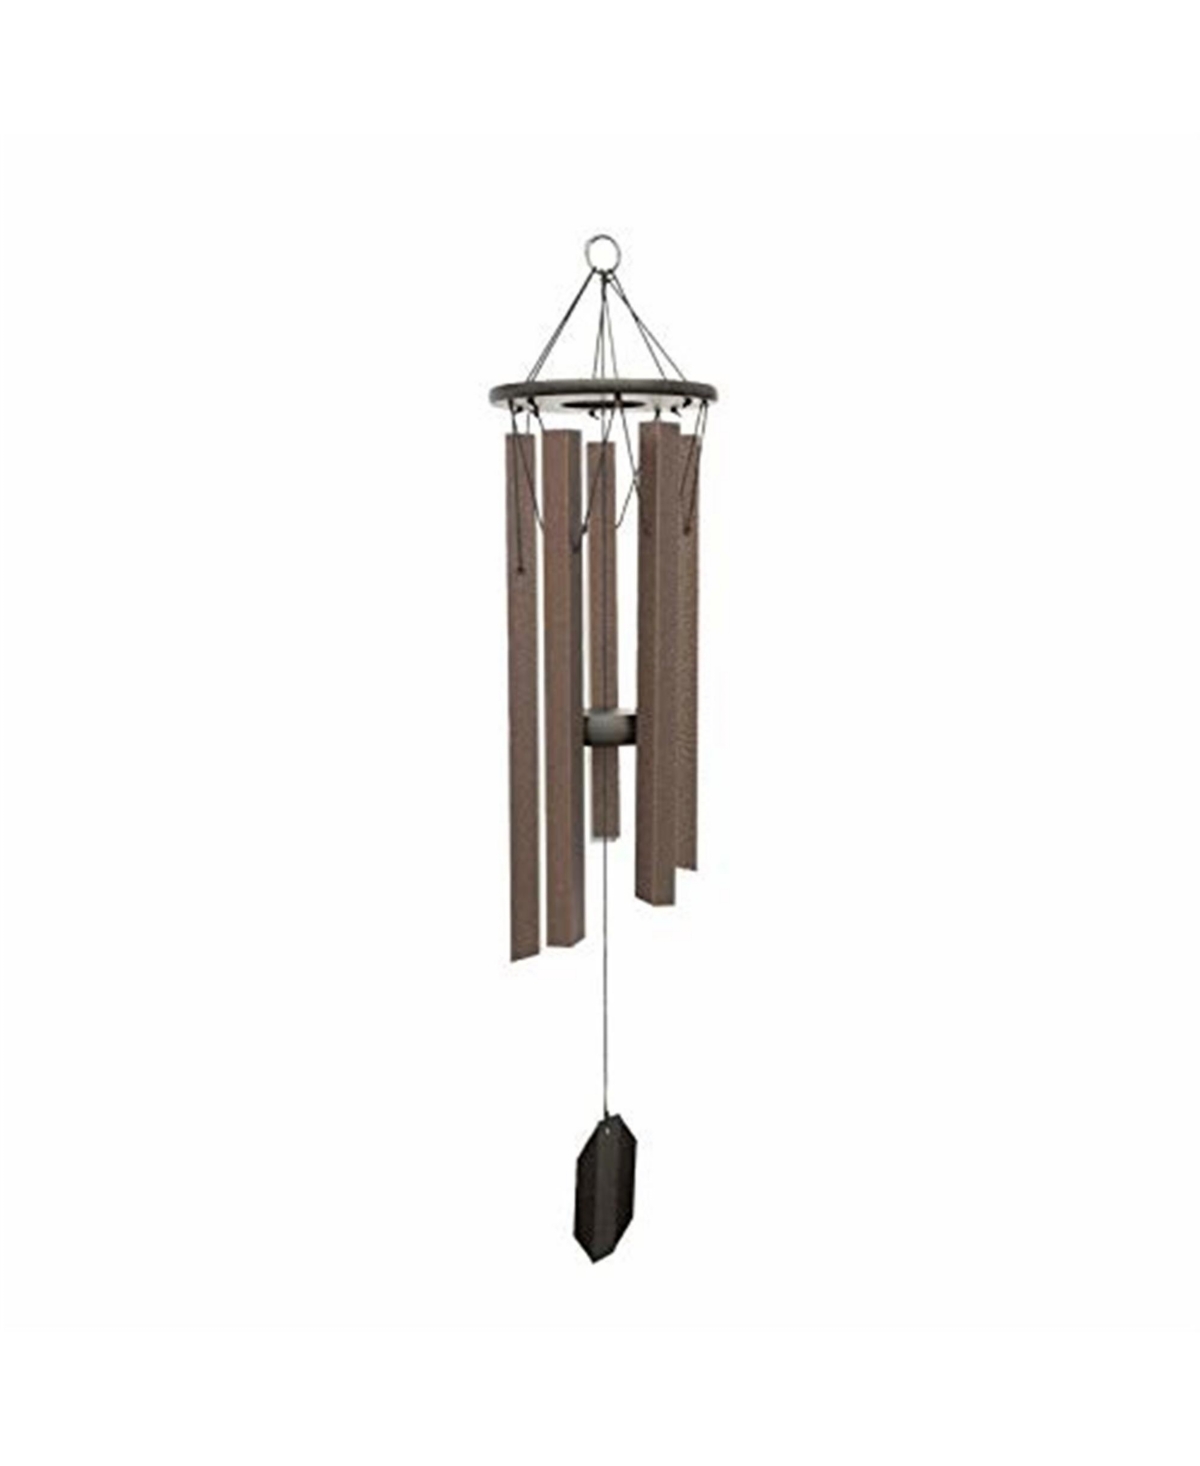 36 Ocean Breeze Wind Chime Amish Crafted Chime - Multi